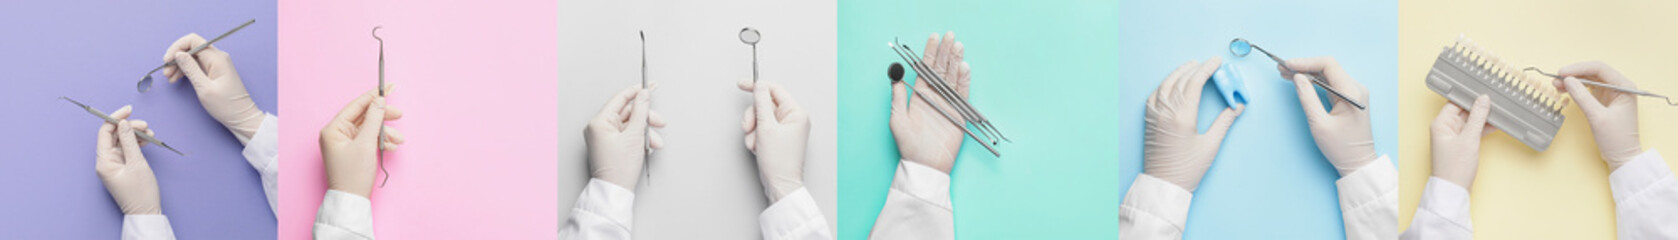 Many hands of doctors with dental tools on colorful background, top view